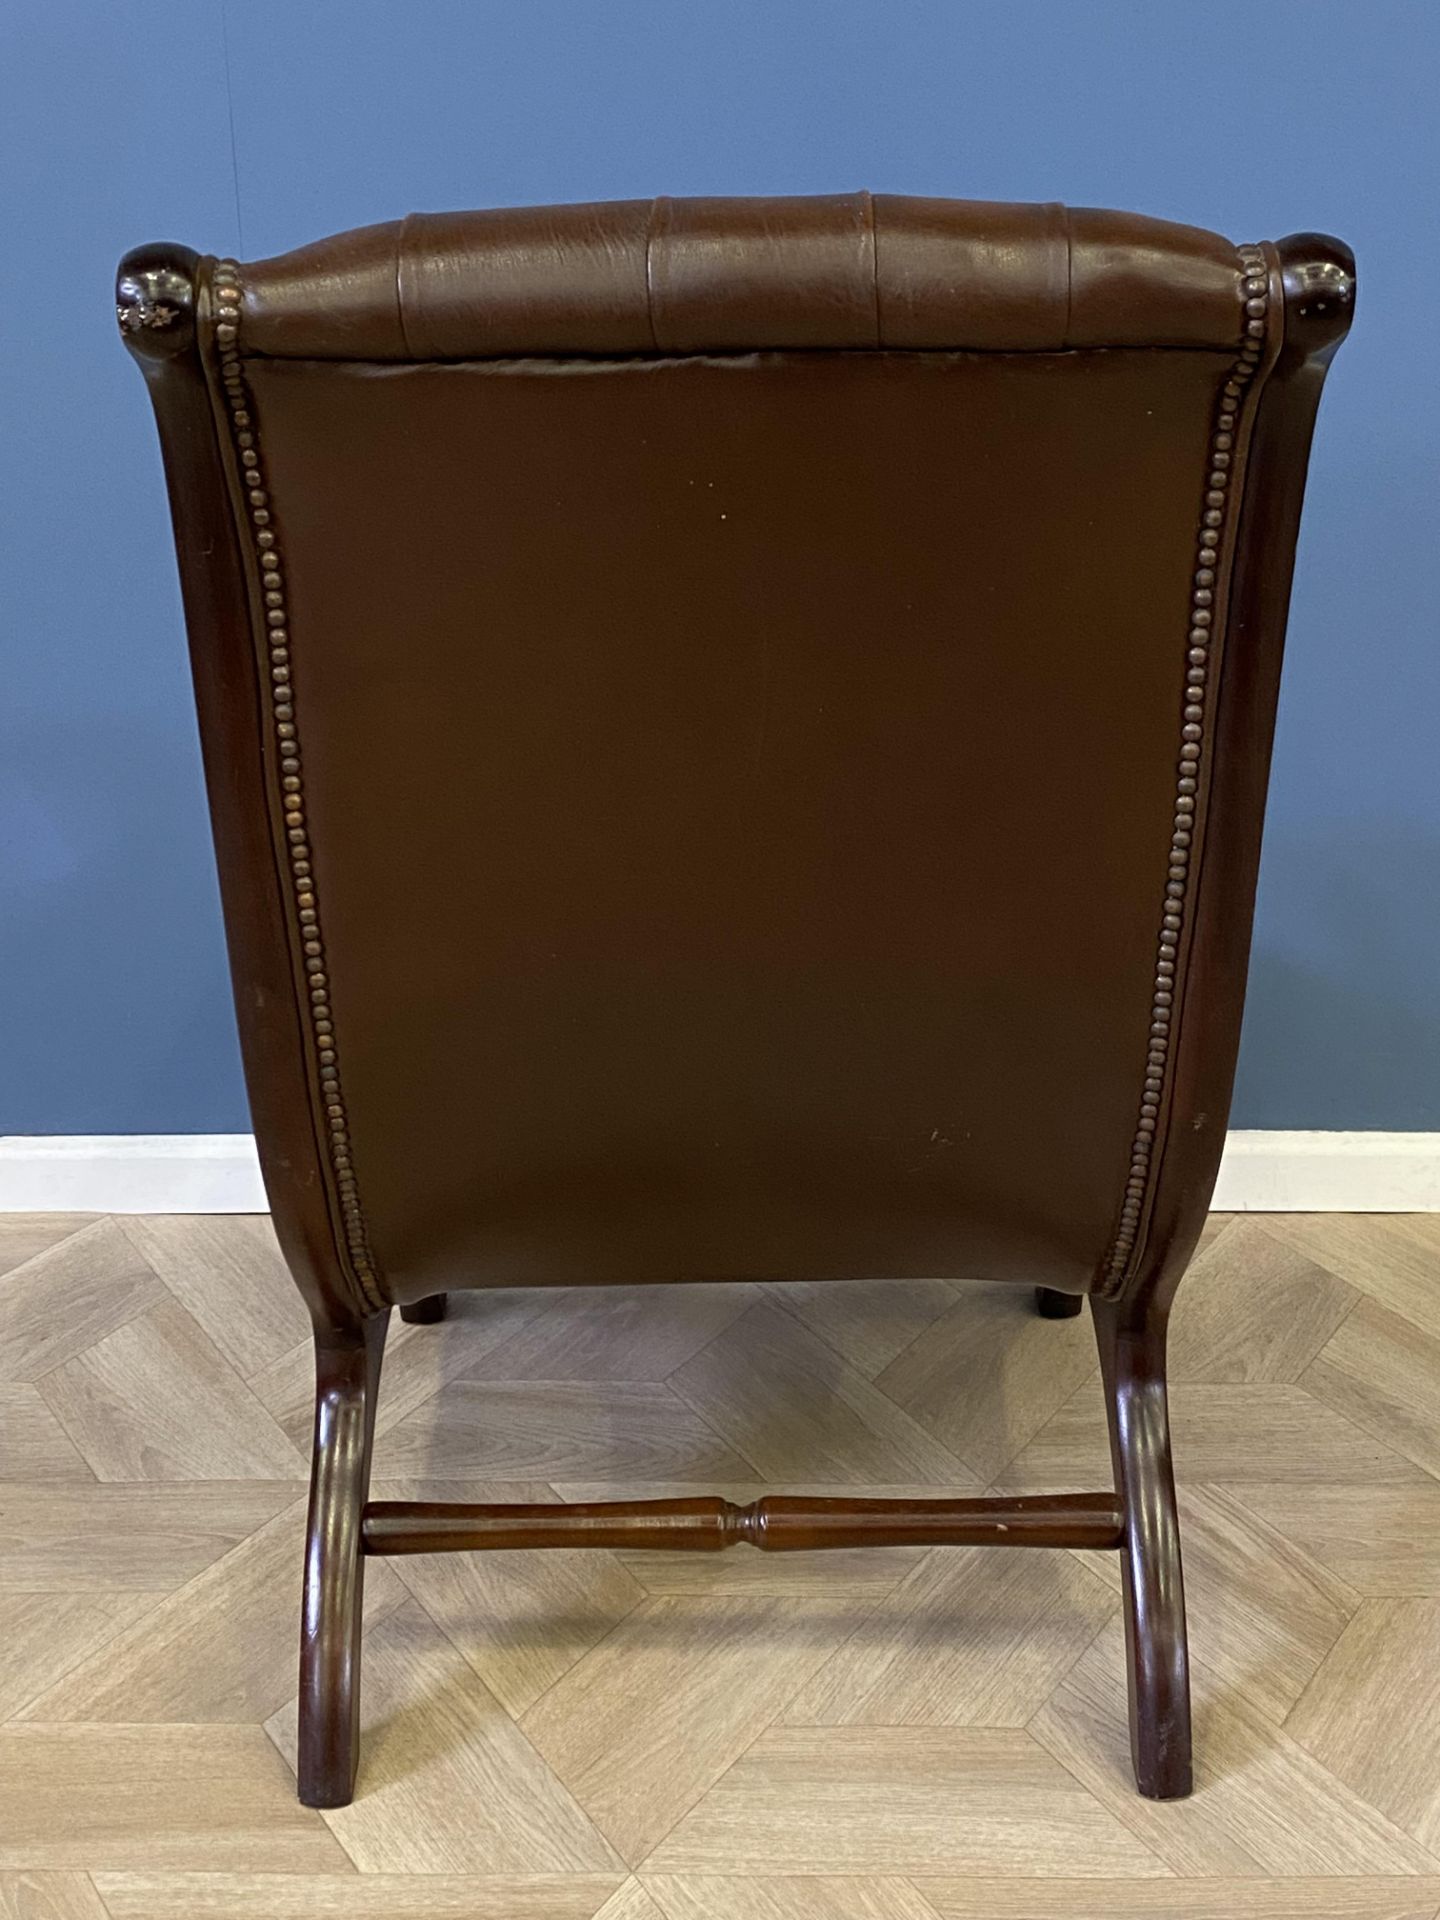 Mahogany framed leather button back armchair - Image 7 of 7